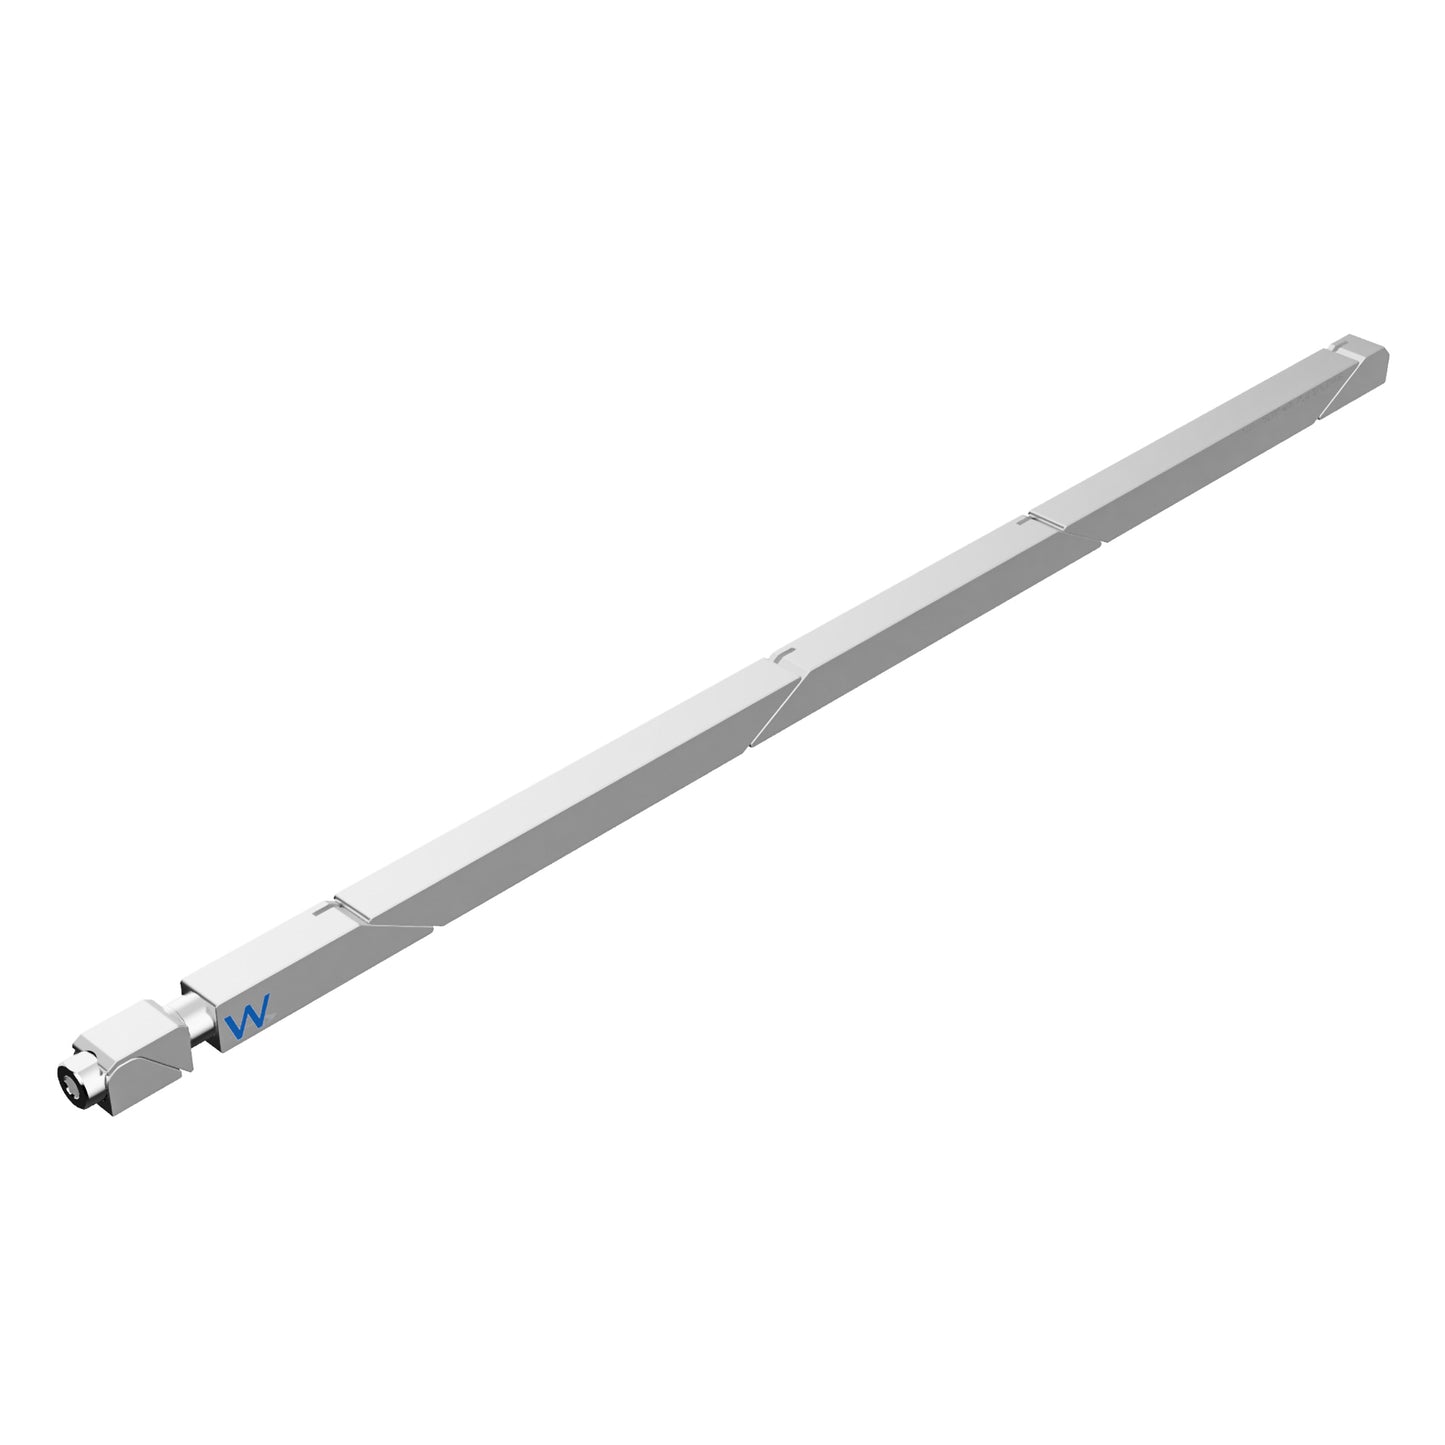 SW7-90-270-250 Max Force Wedgelock, segmented long rectulangular hardware component, Clear Chemical Film Finish